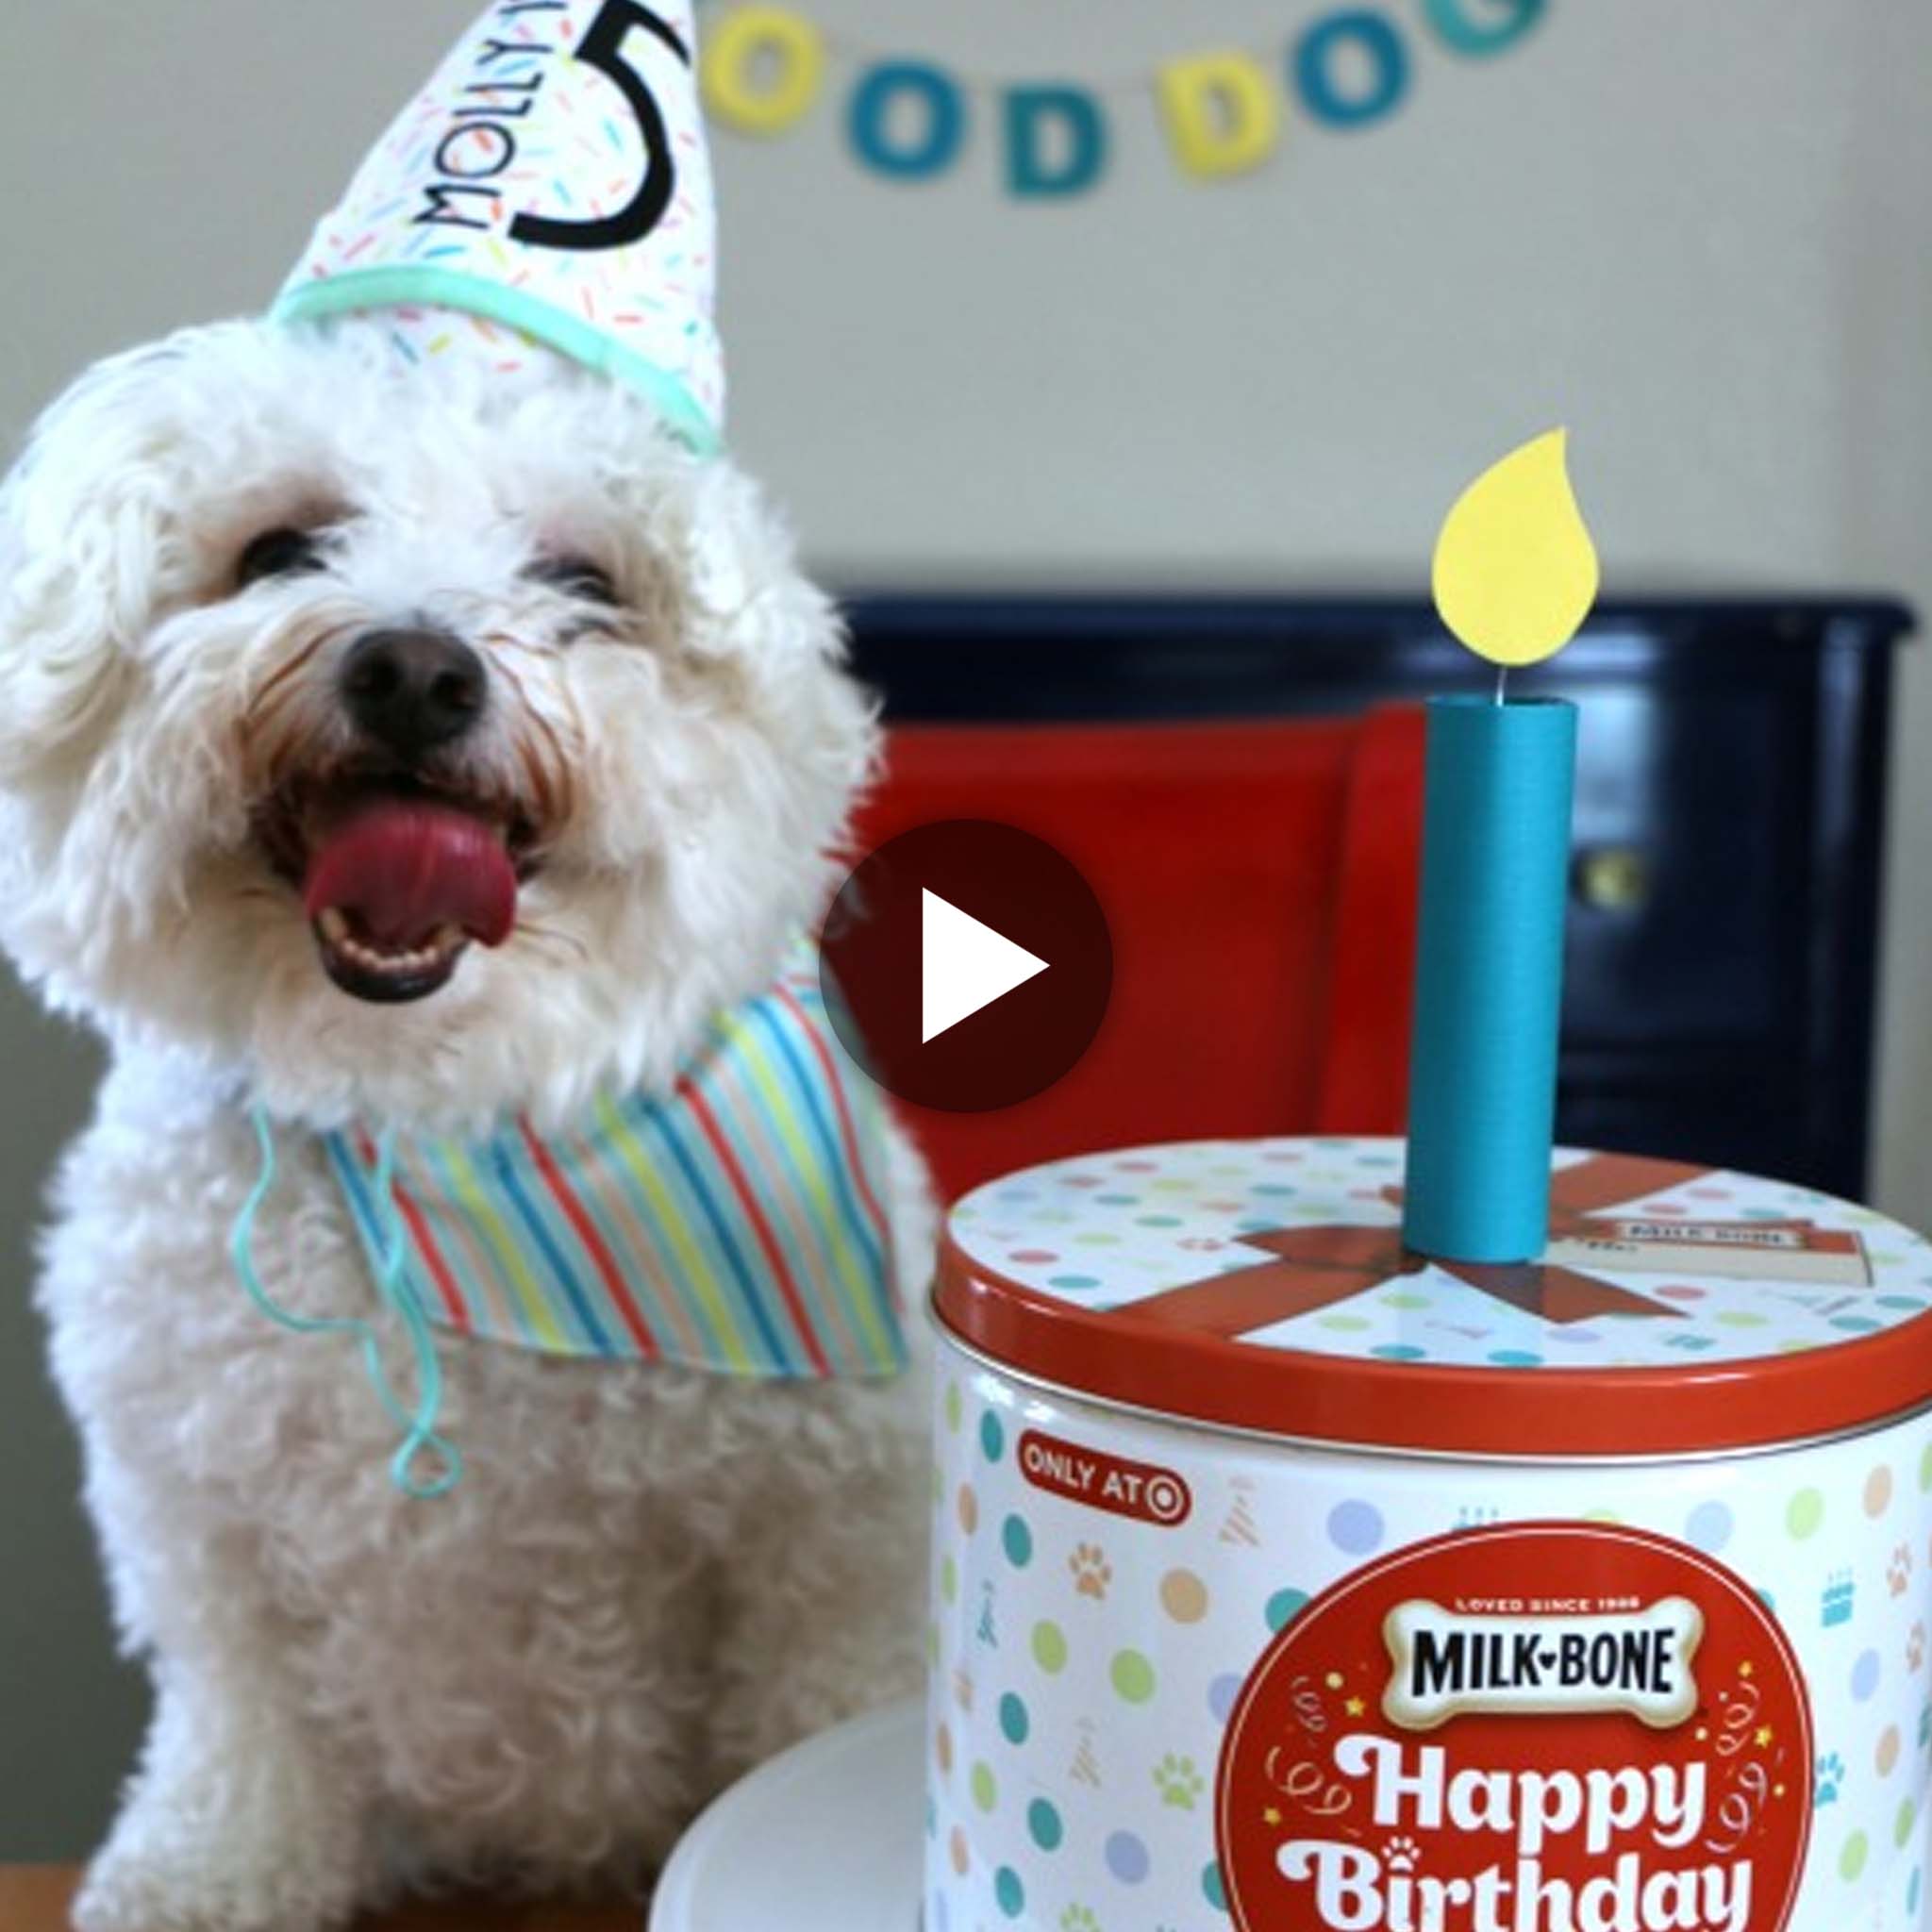 When the dog saw the fantastic birthday celebration that his owner had planned, he was pleasantly surprised! (Video)